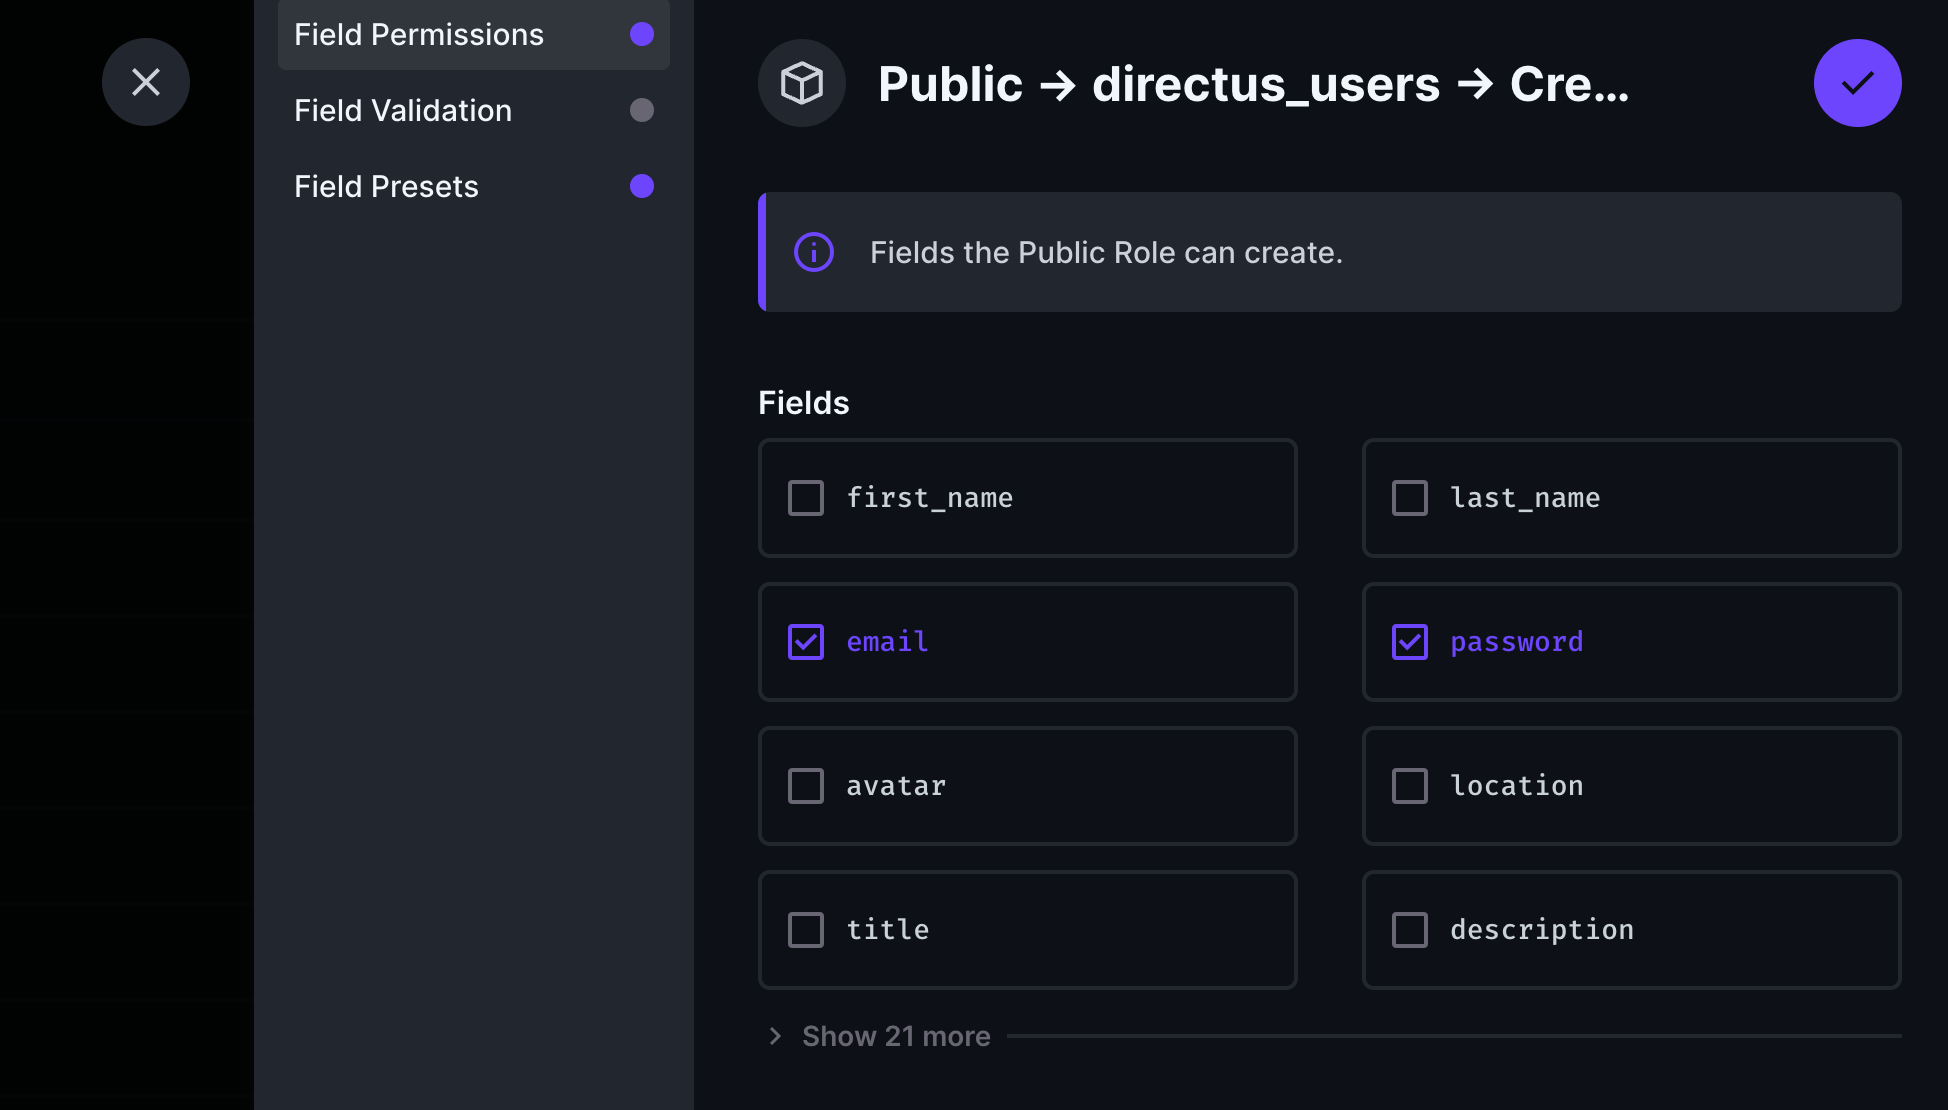 Public role directus_users create field permissions only allow Email and Password